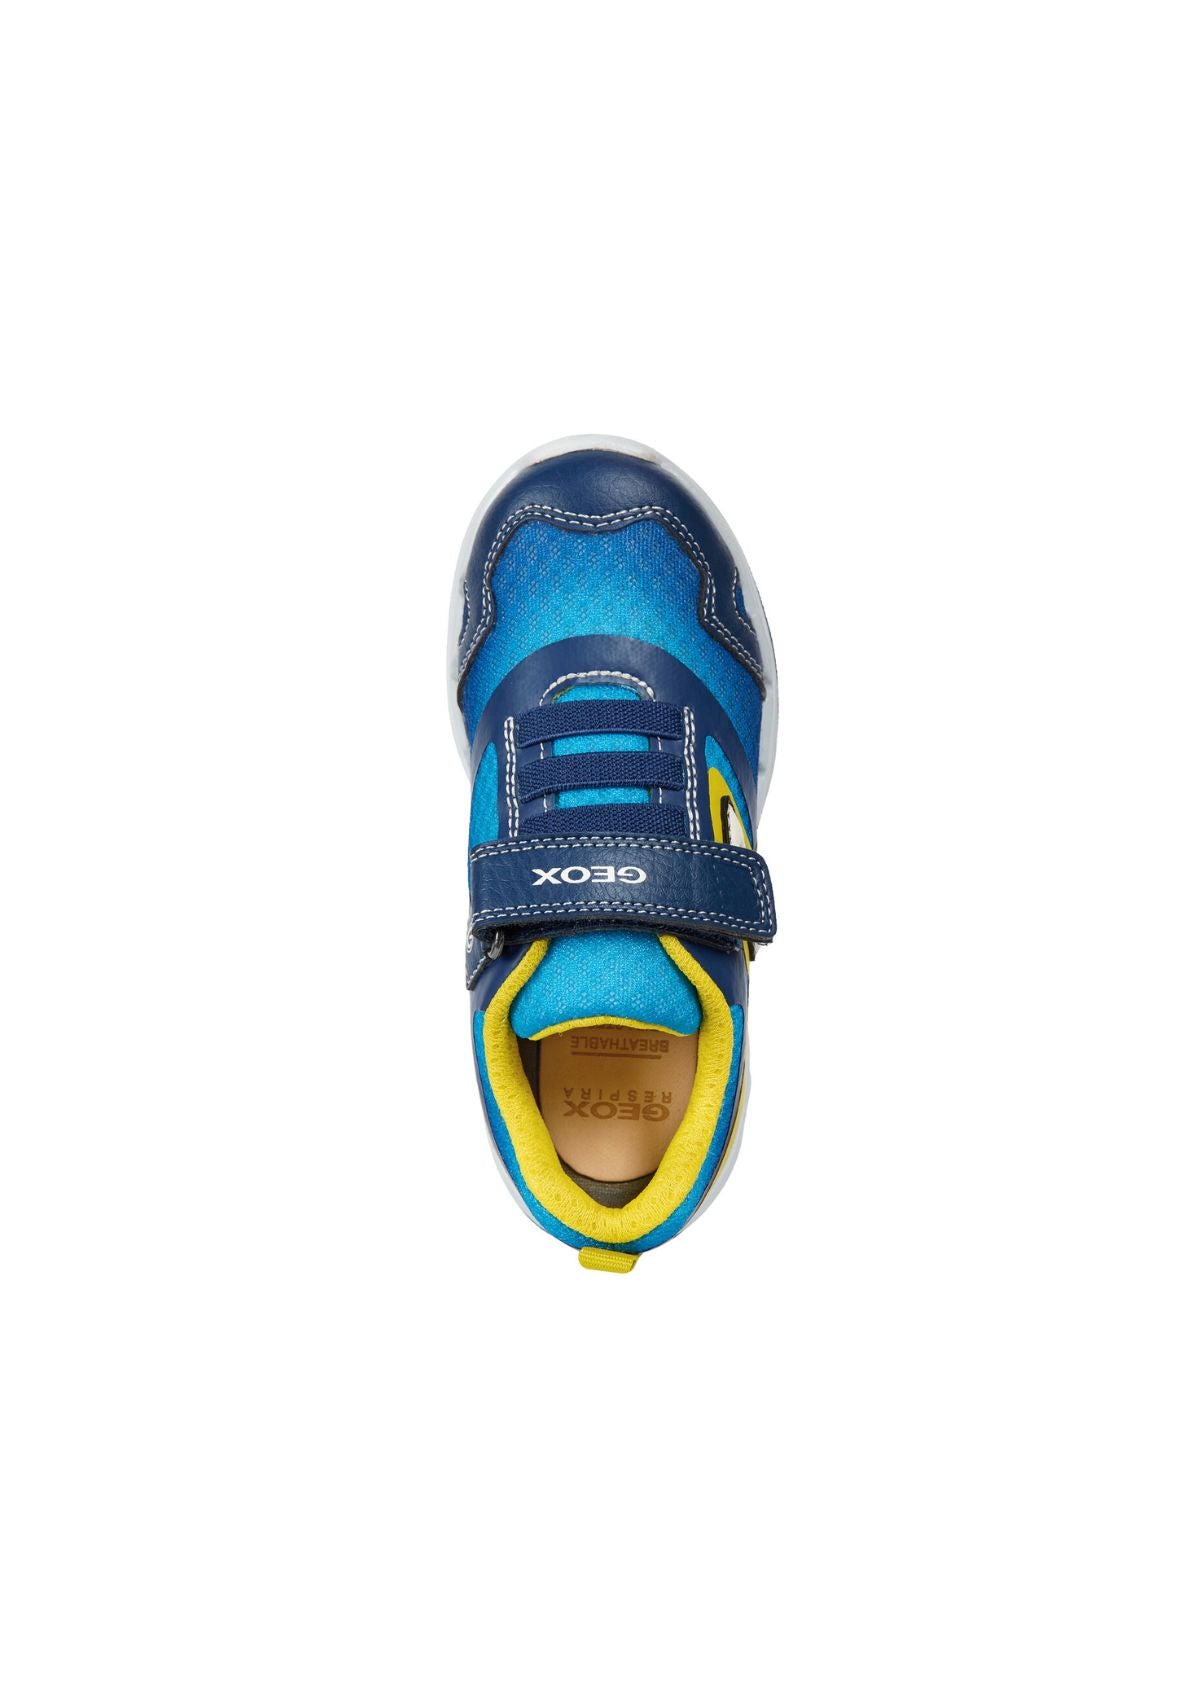 Geox Boys Trainers DAKIN Lights-Up Blue Lime up